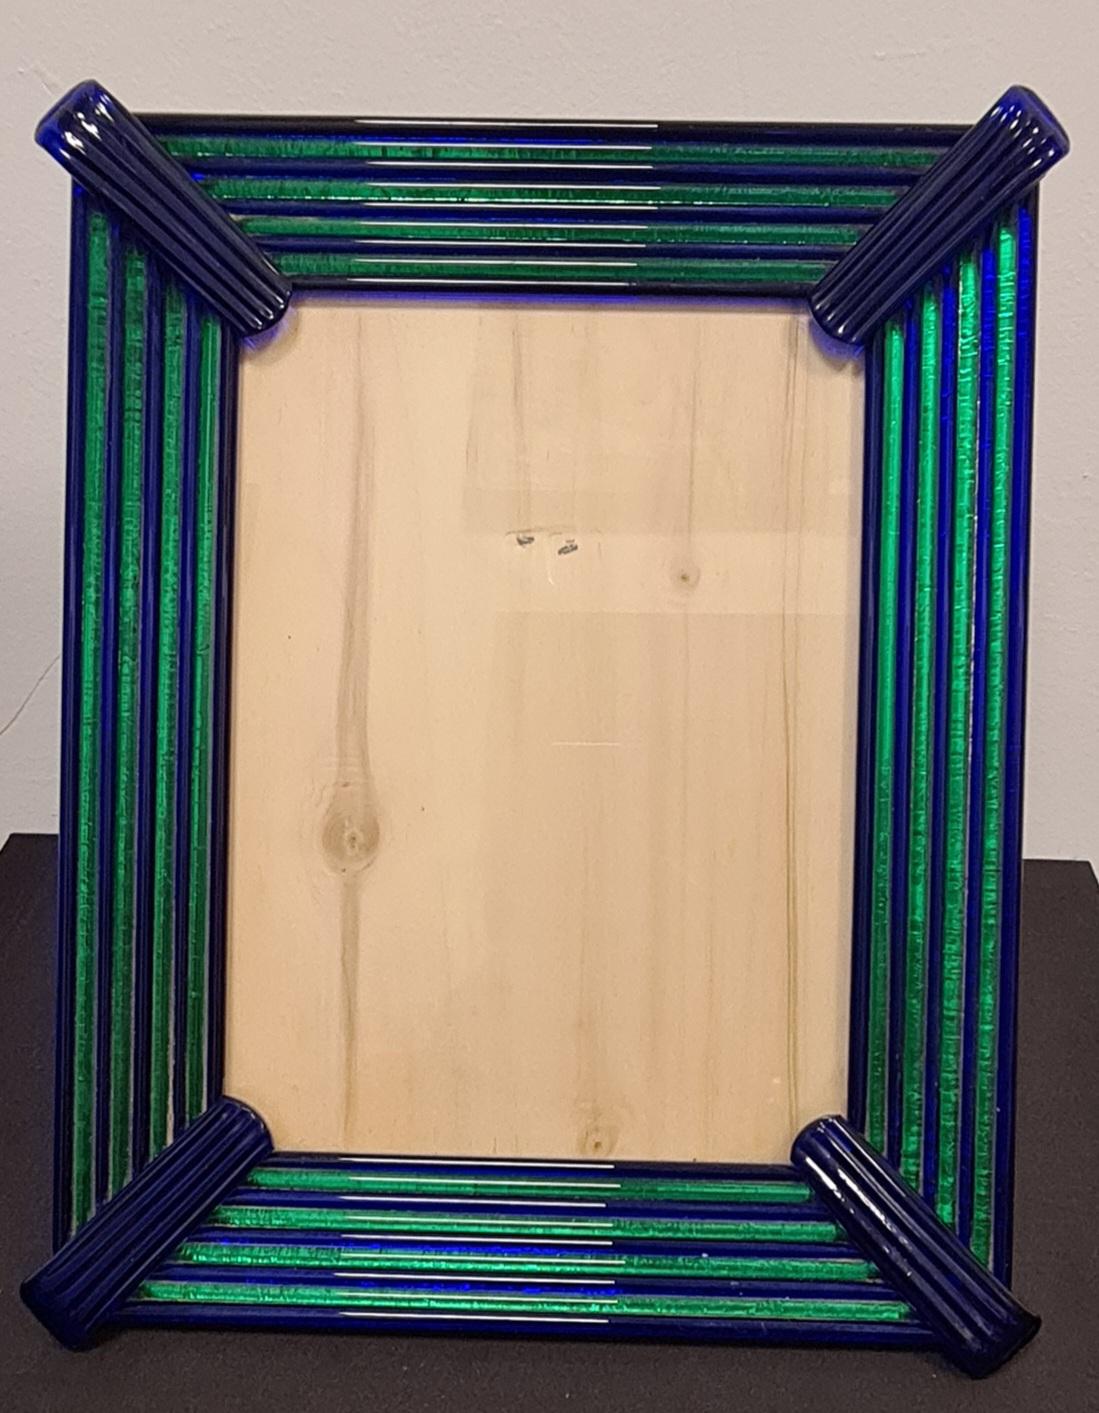 Fine glass frame attributable to master glassmaker Archimede Seguso.

The chronice is composed of blue and green murano glass rods , alternating.

Glass rods are arranged on a lacquered wooden stand.

Archimede Seguso was one of the greatest master